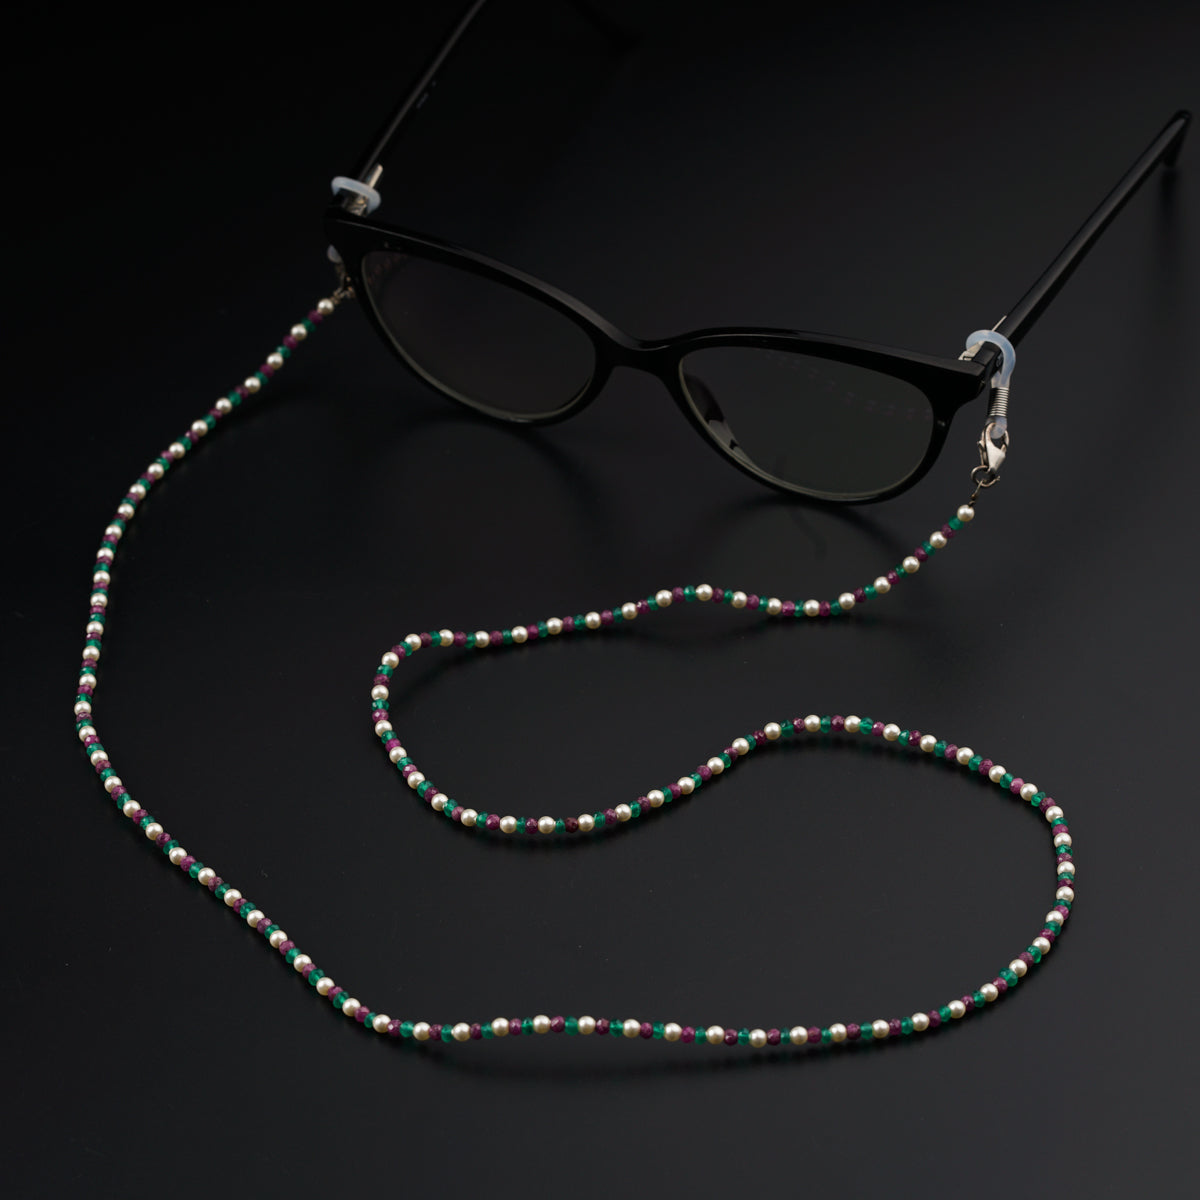 a pair of sunglasses and a beaded necklace